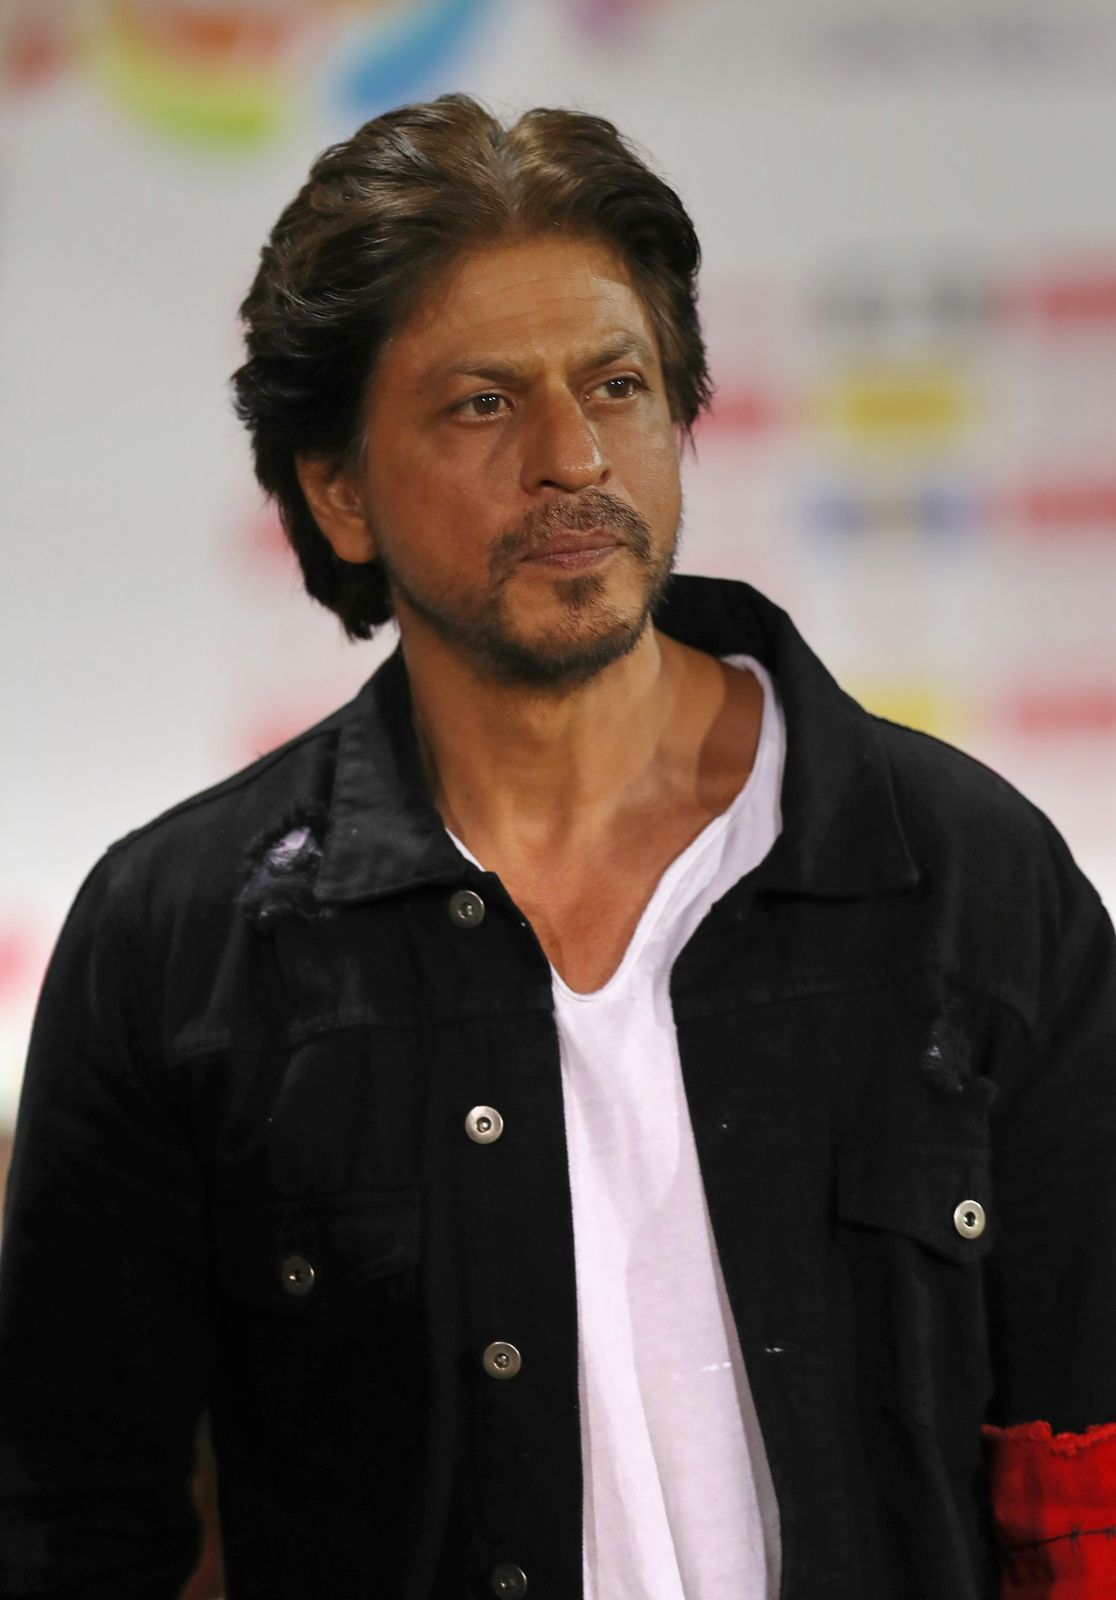 Pathan: Shah Rukh Khan Enters Into A Profit Sharing Agreement With The Makers For The Film? Read Details...